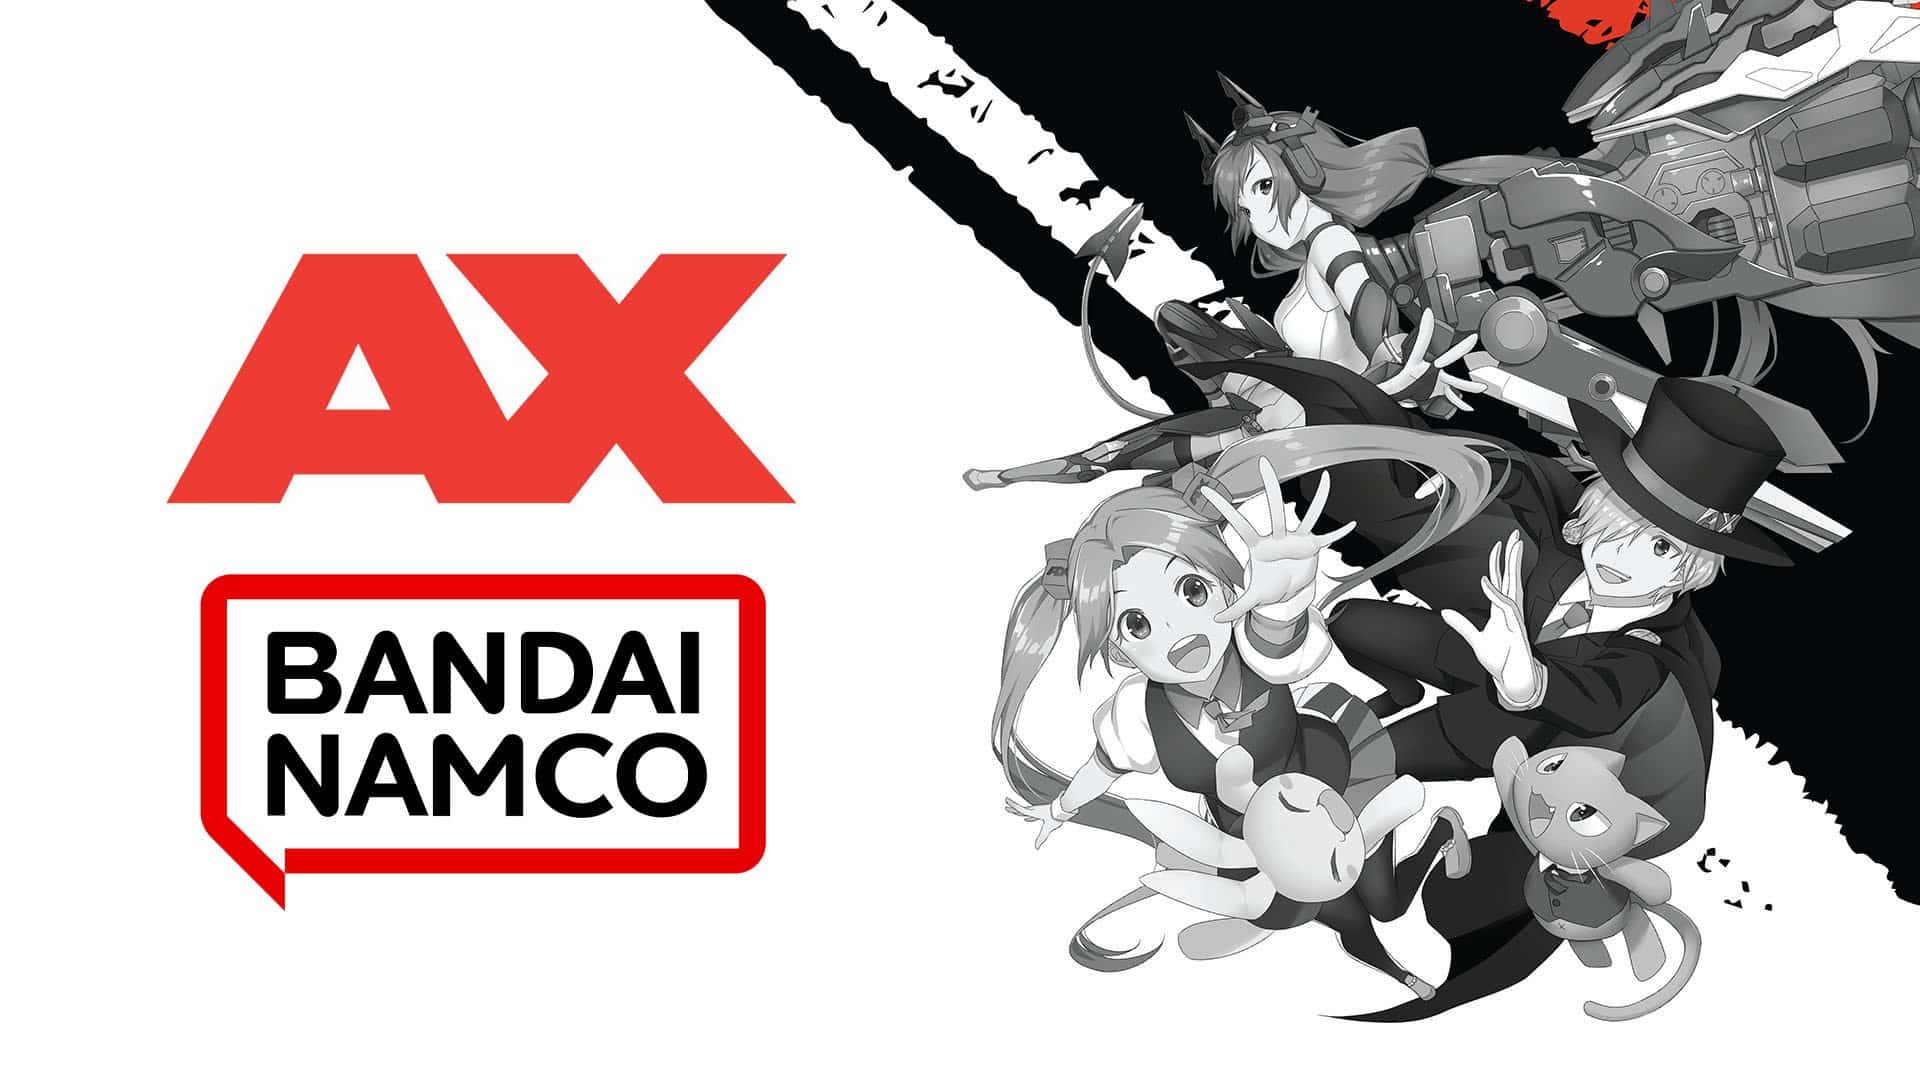 Bandai Namco Announces Its Own Showcase Planned During Anime Expo, With